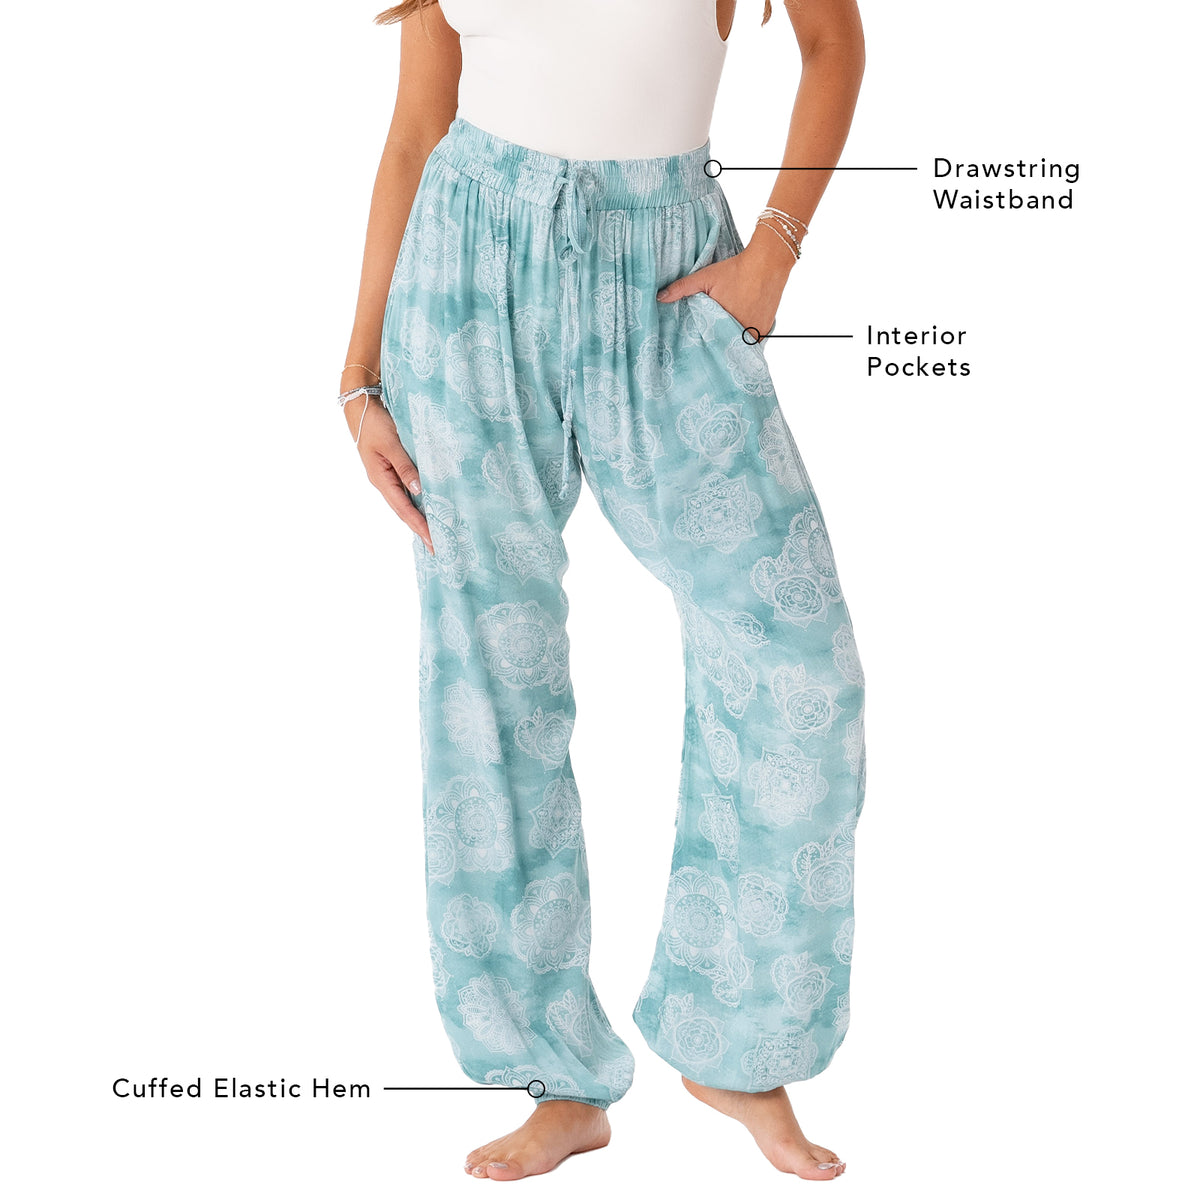 Model wearing light teal and white mandala paisley print harem pants with a drawstring waistband. The picture outlines the features of these pants including a drawstring waistband, interior pockets and a cuffed elastic bottom hem